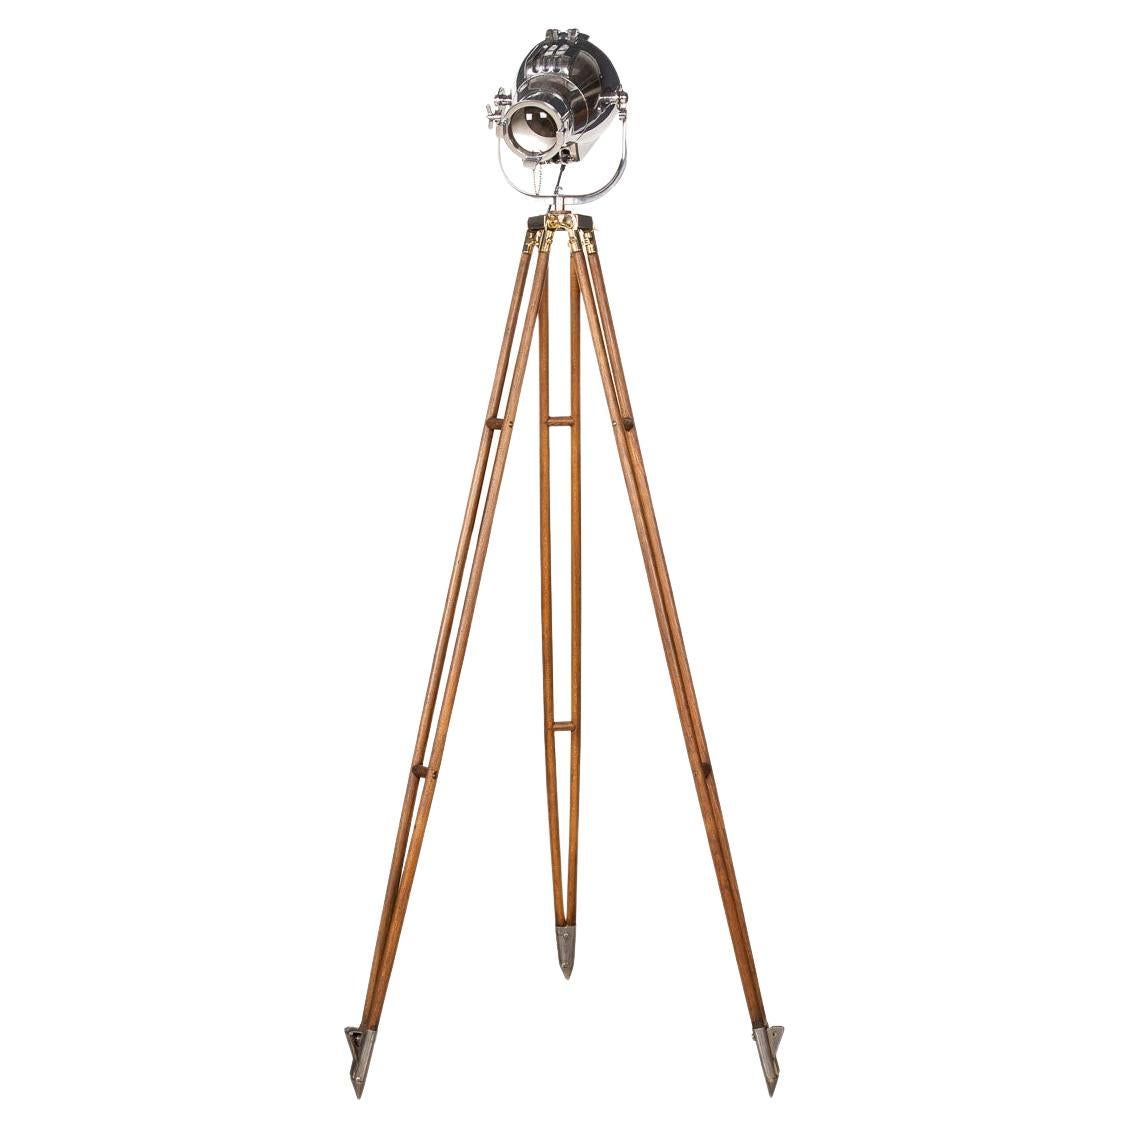 20th Century, English, "Strand Electric" Theatre Lamp on a Tripod Stand